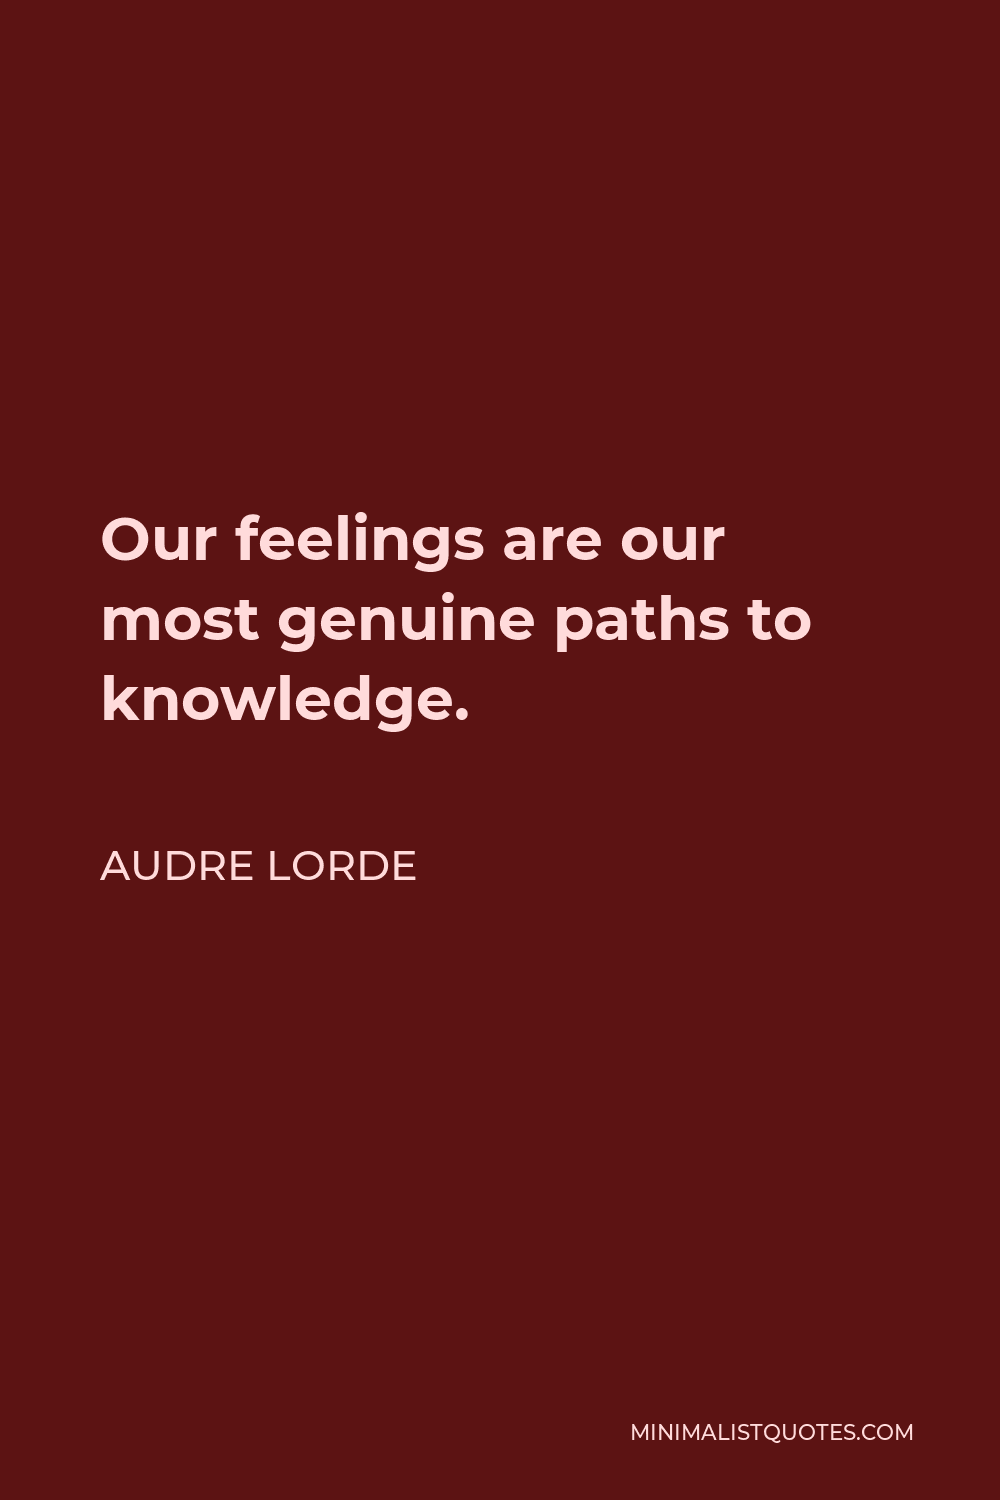 Audre Lorde Quote - Our feelings are our most genuine paths to knowledge.